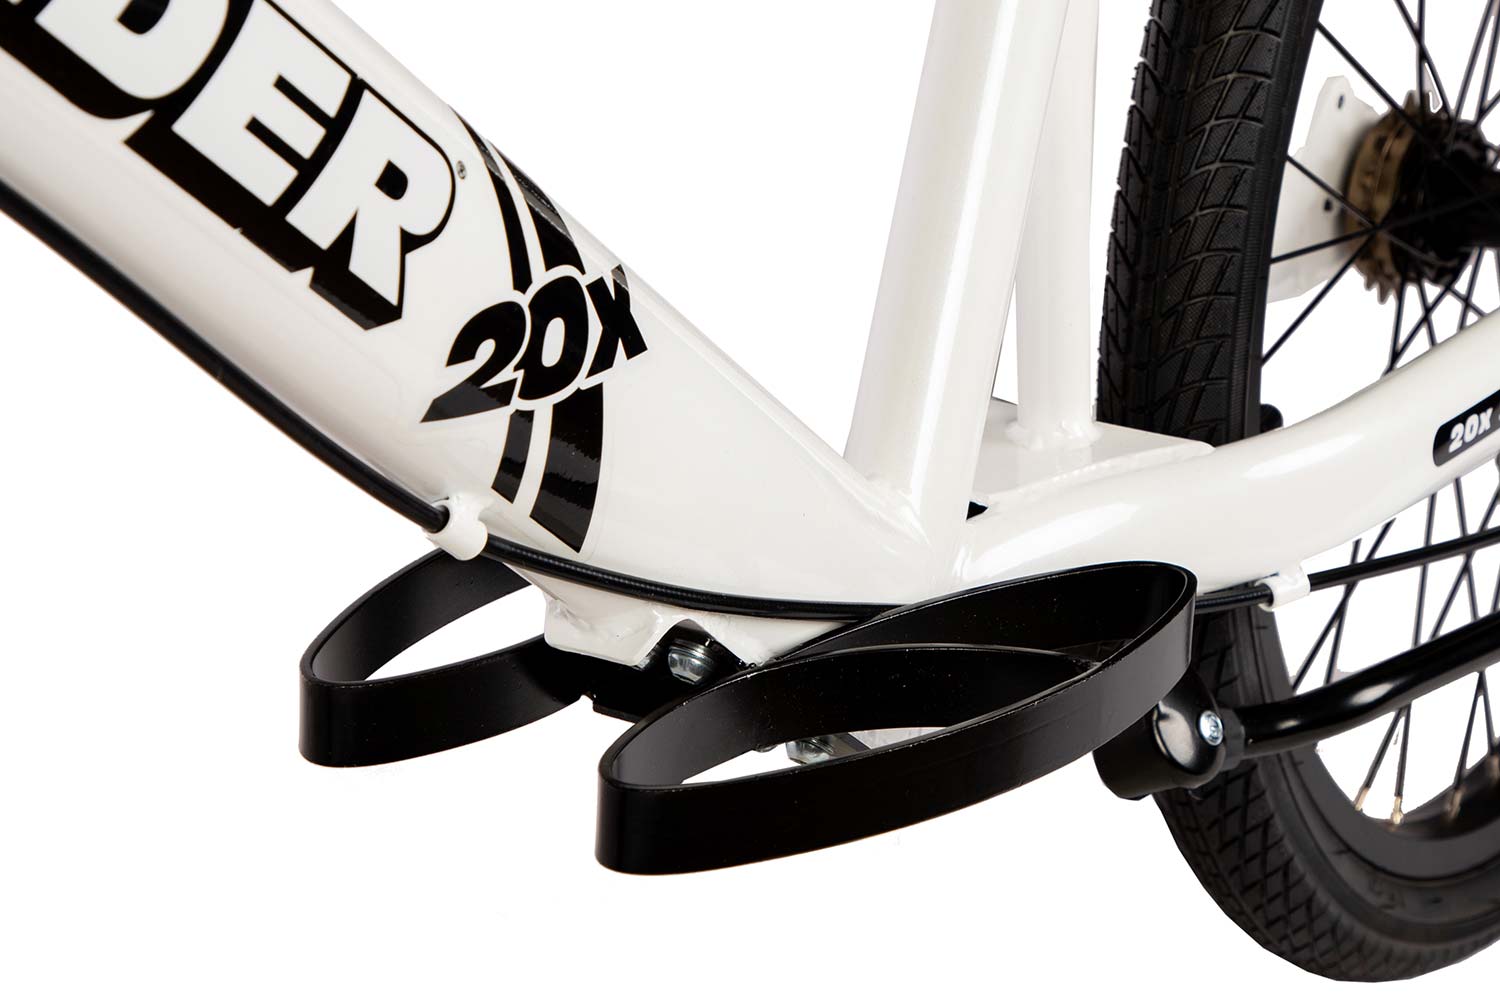 A studio detail of the footrests on the Strider 20x Sport, a 20" all-in-one balance and pedal bike